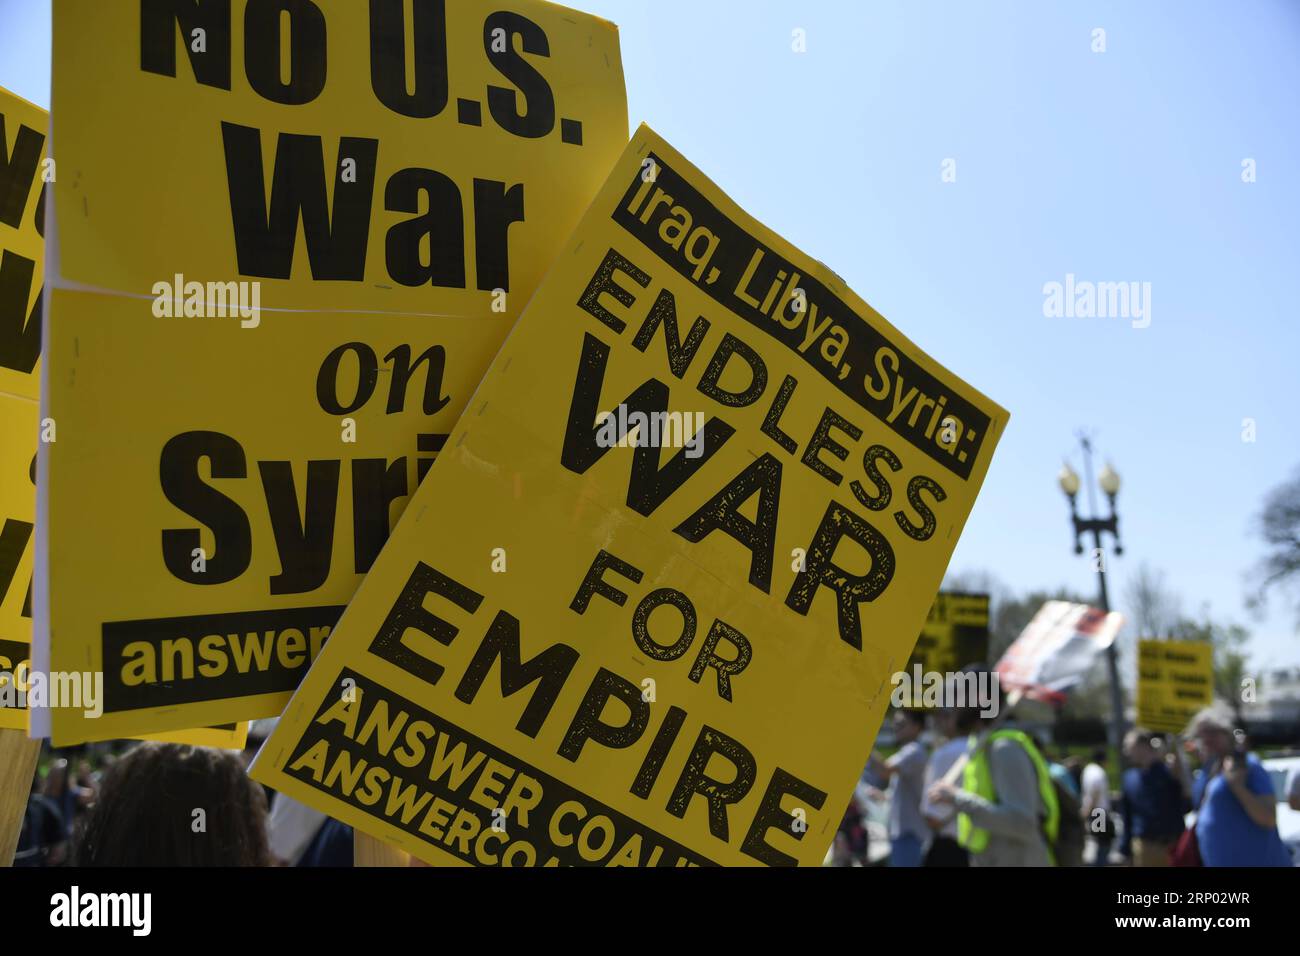 (180414) -- WASHINGTON, April 14, 2018 -- People protest against U.S. strike on Syria outside the White House in Washington D.C., the United States, on April 14, 2018. The United States launched precise strike in cooperation with Britain and France against Syrian military facilities on Friday. ) U.S.-WASHINGTON D.C.-STRIKE-SYRIA-PROTEST YangxChenglin PUBLICATIONxNOTxINxCHN Stock Photo